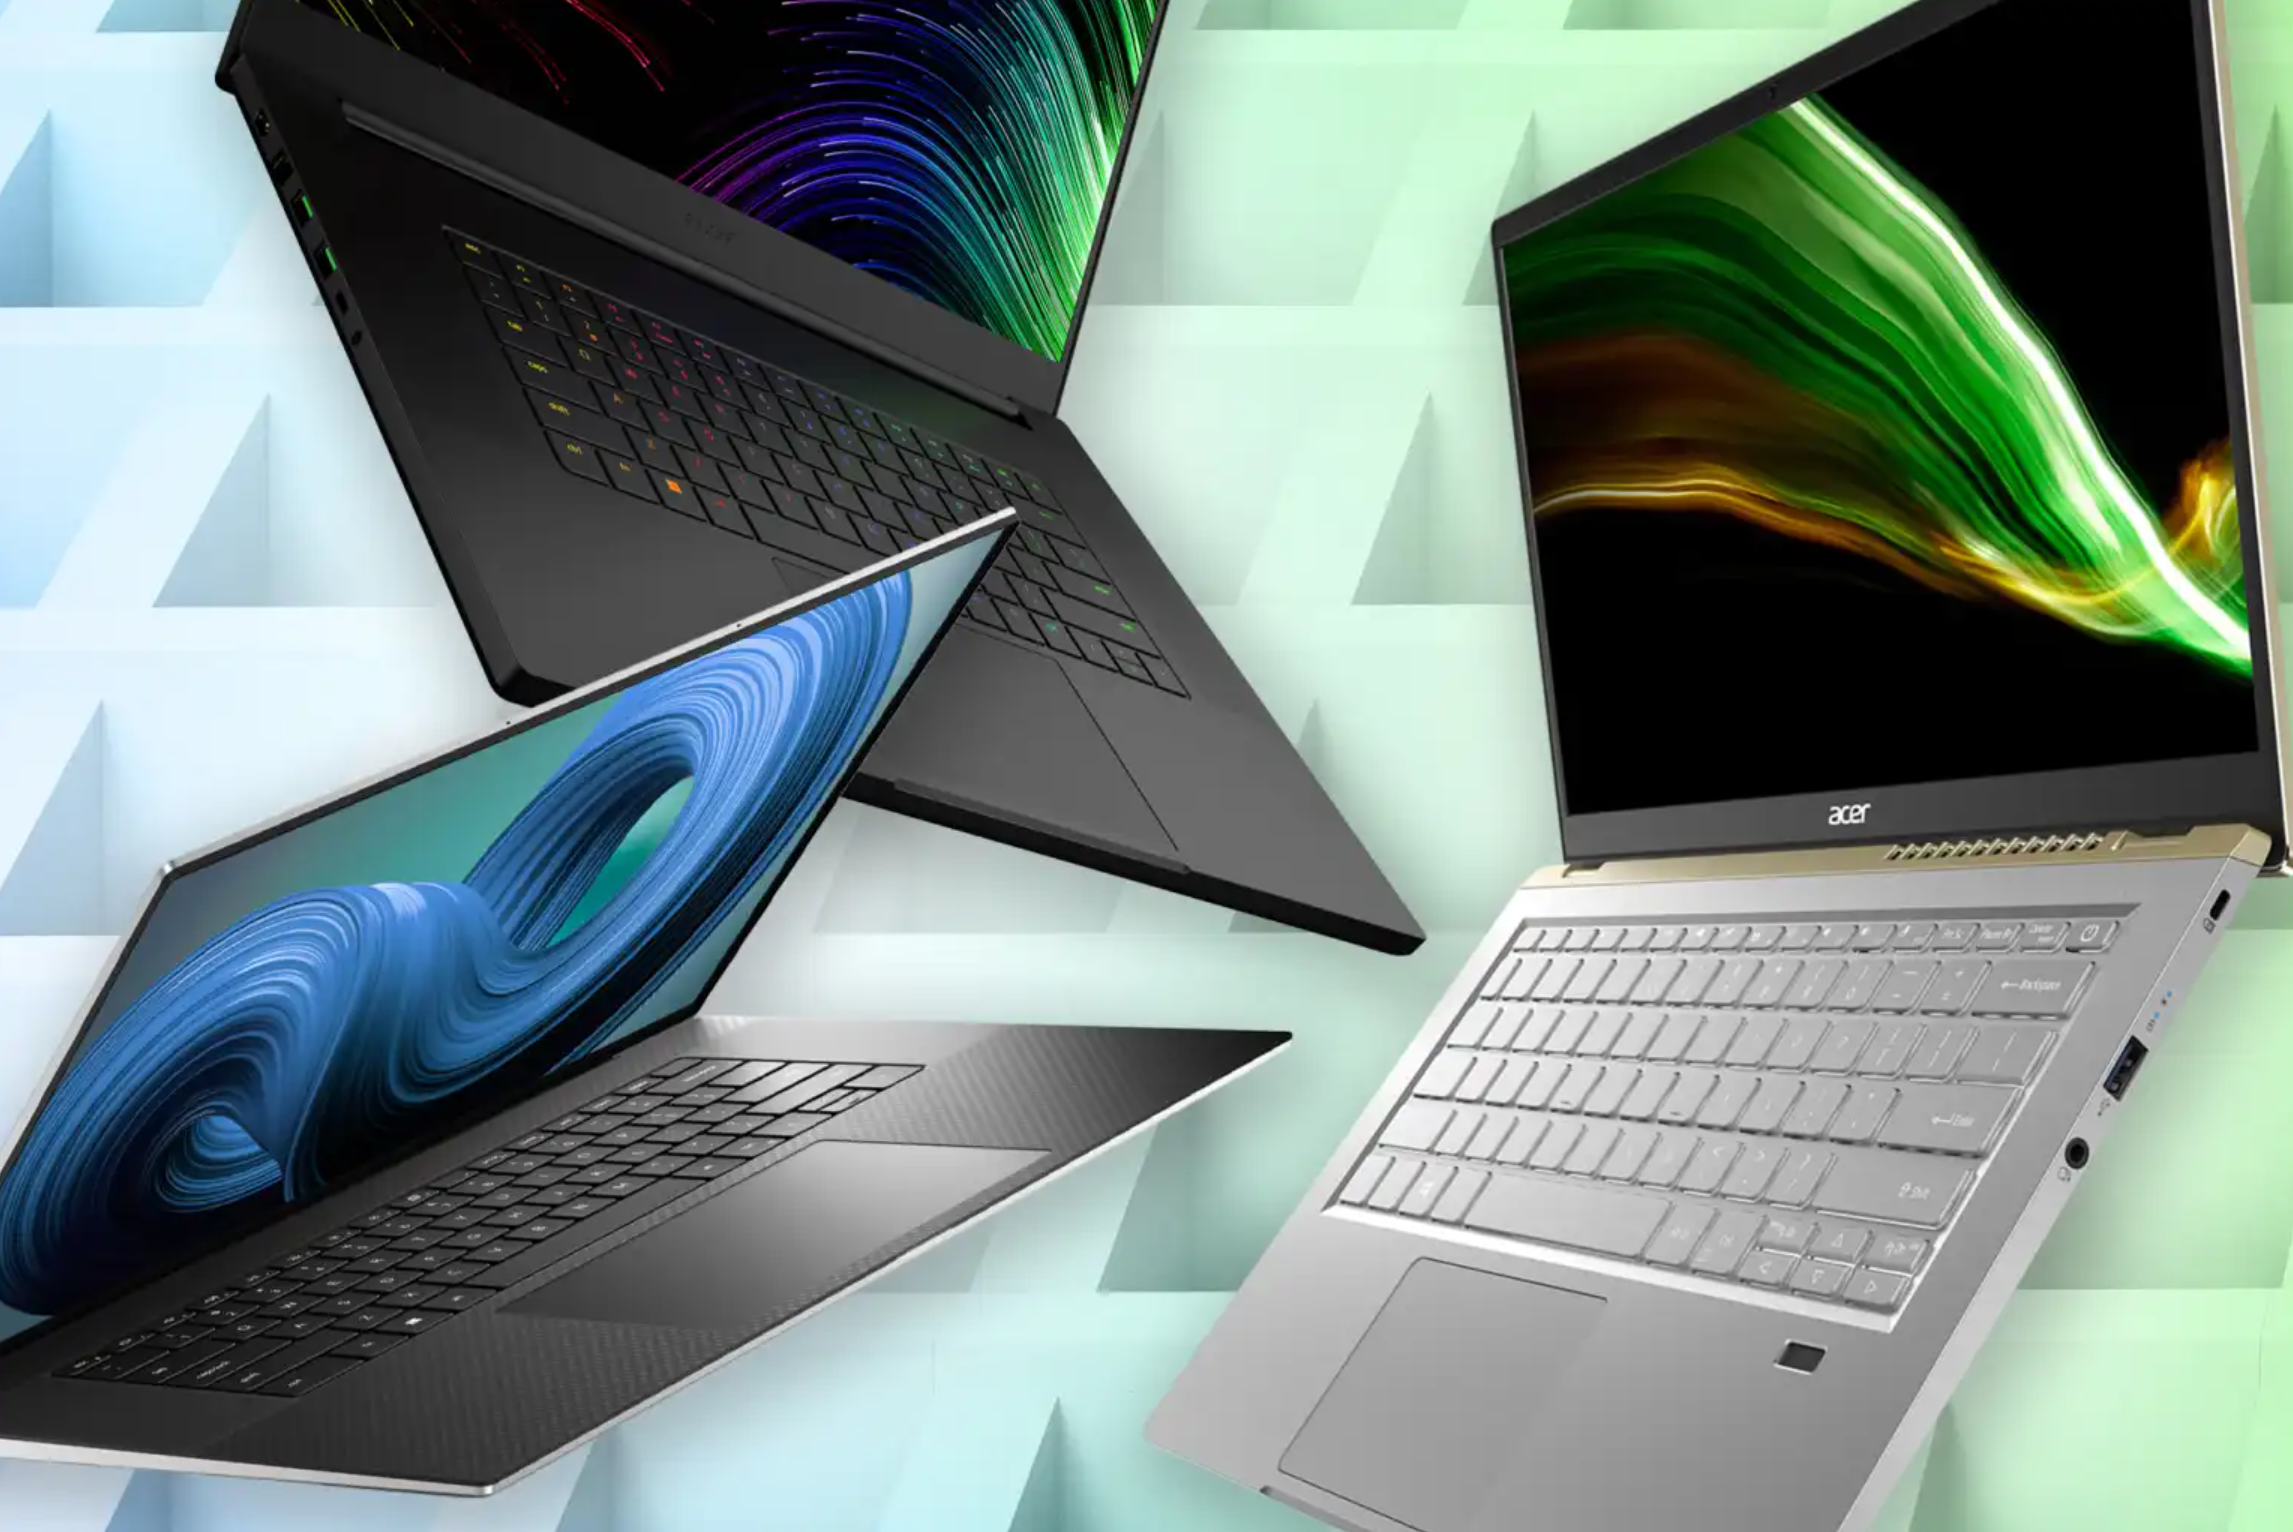 Black Friday laptop deals: What to expect and early sales